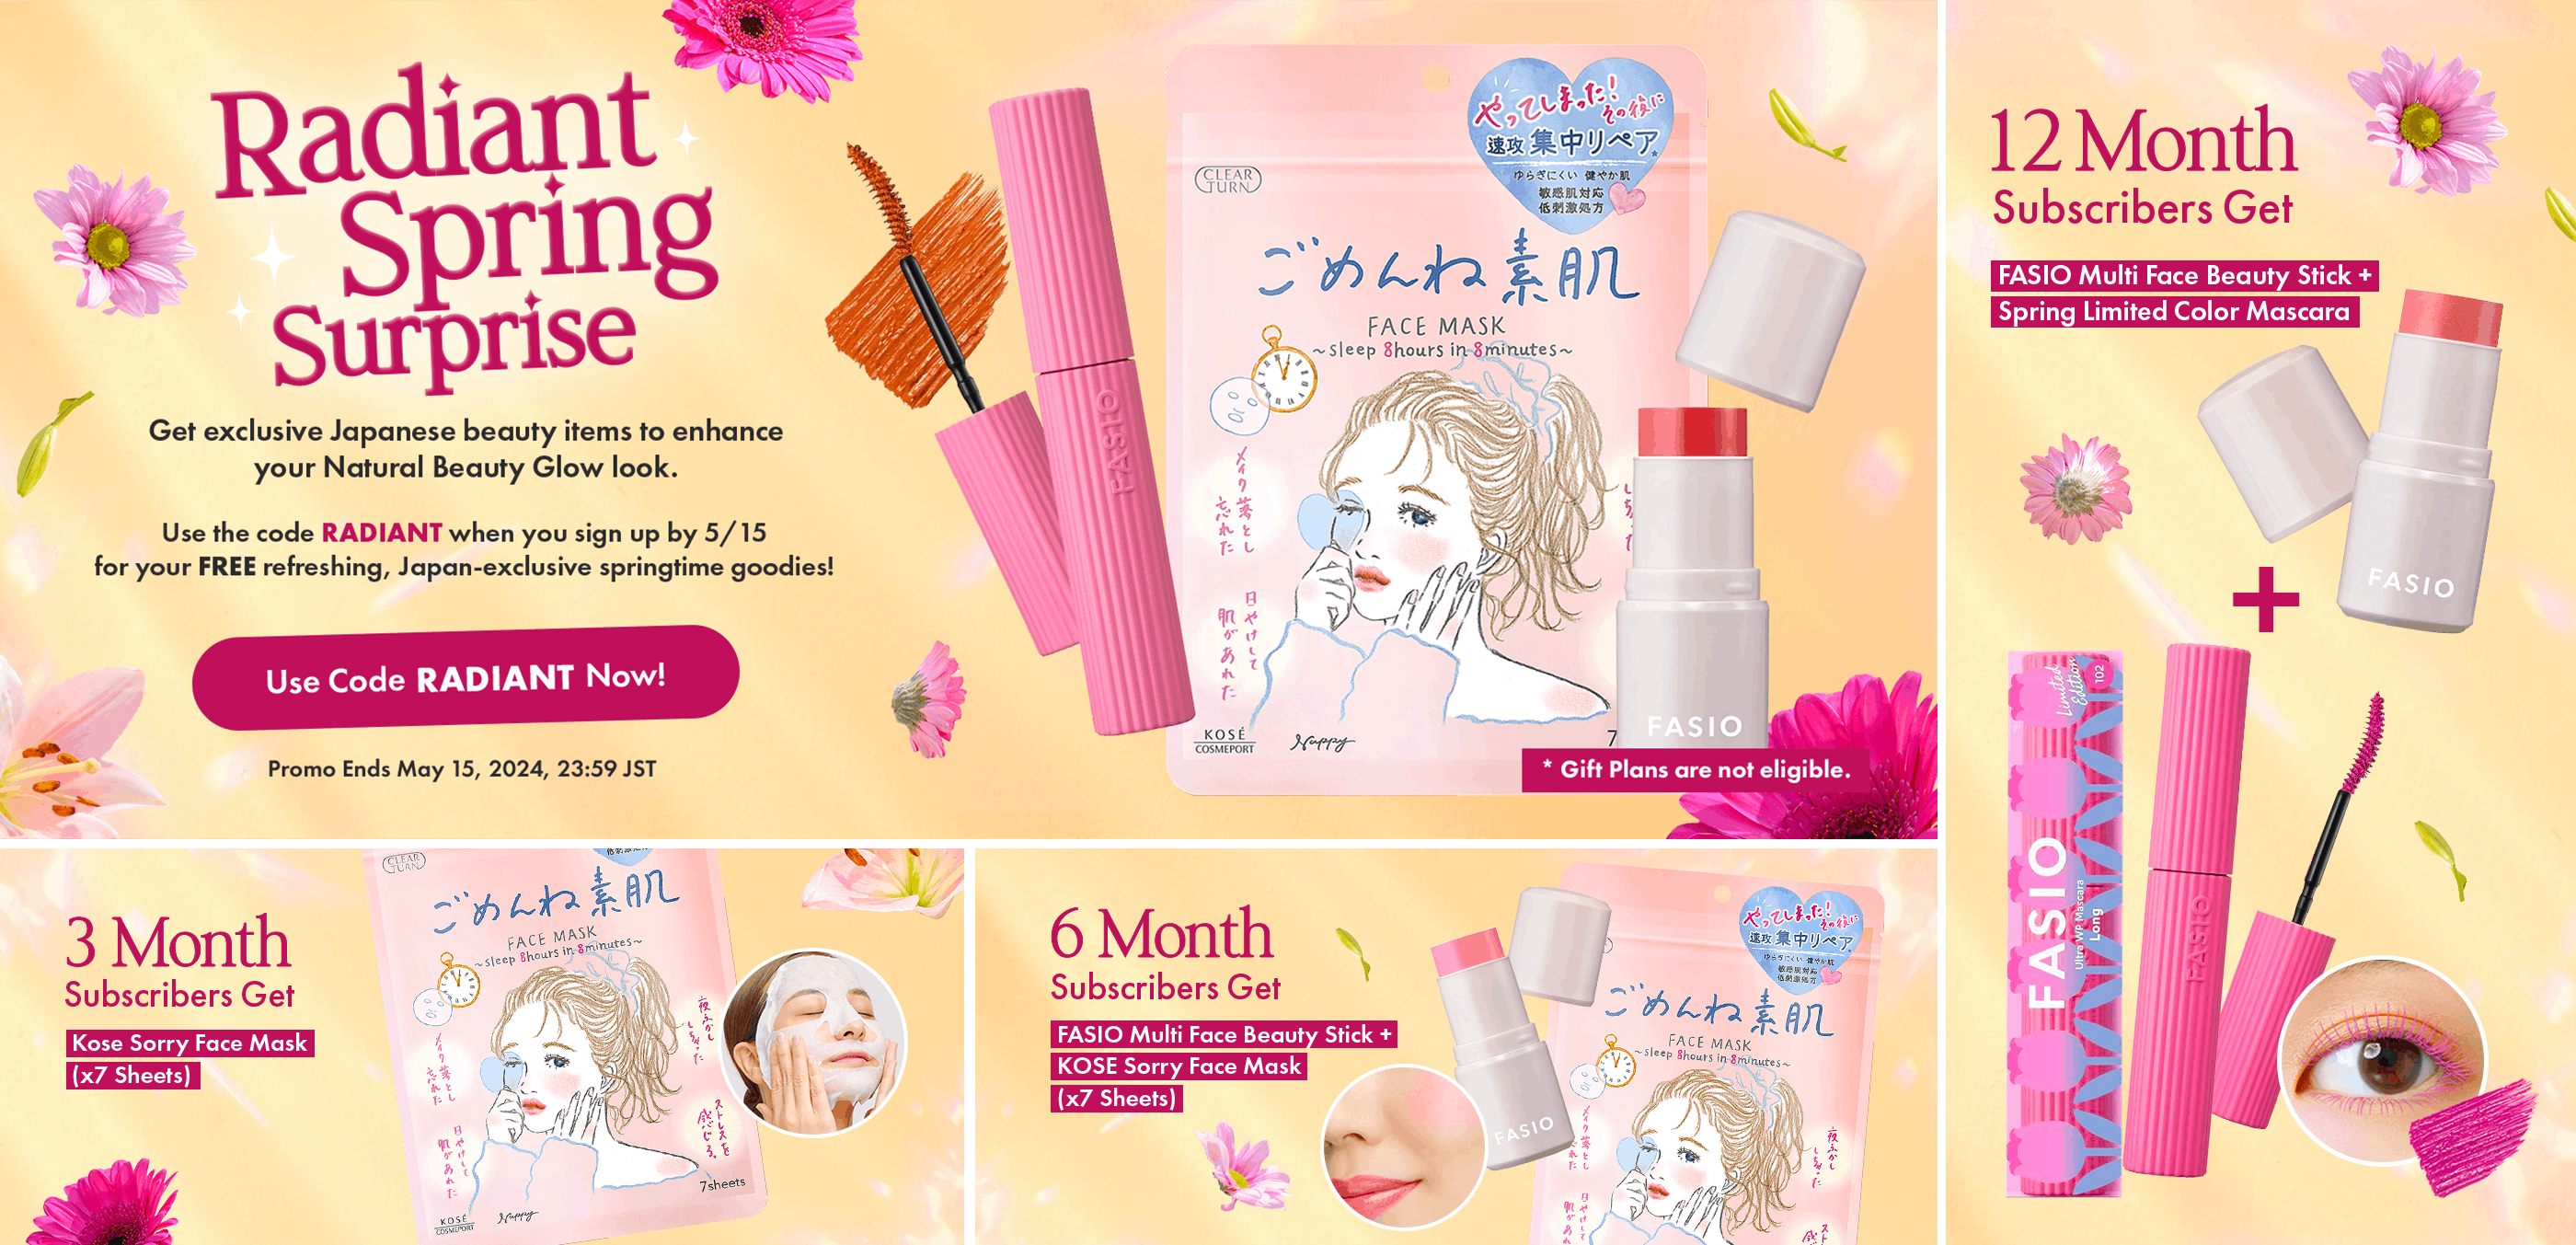 Sign up for nomakenolife using the code RADIANT to get these beauty-enhancing items in your box by 5/15